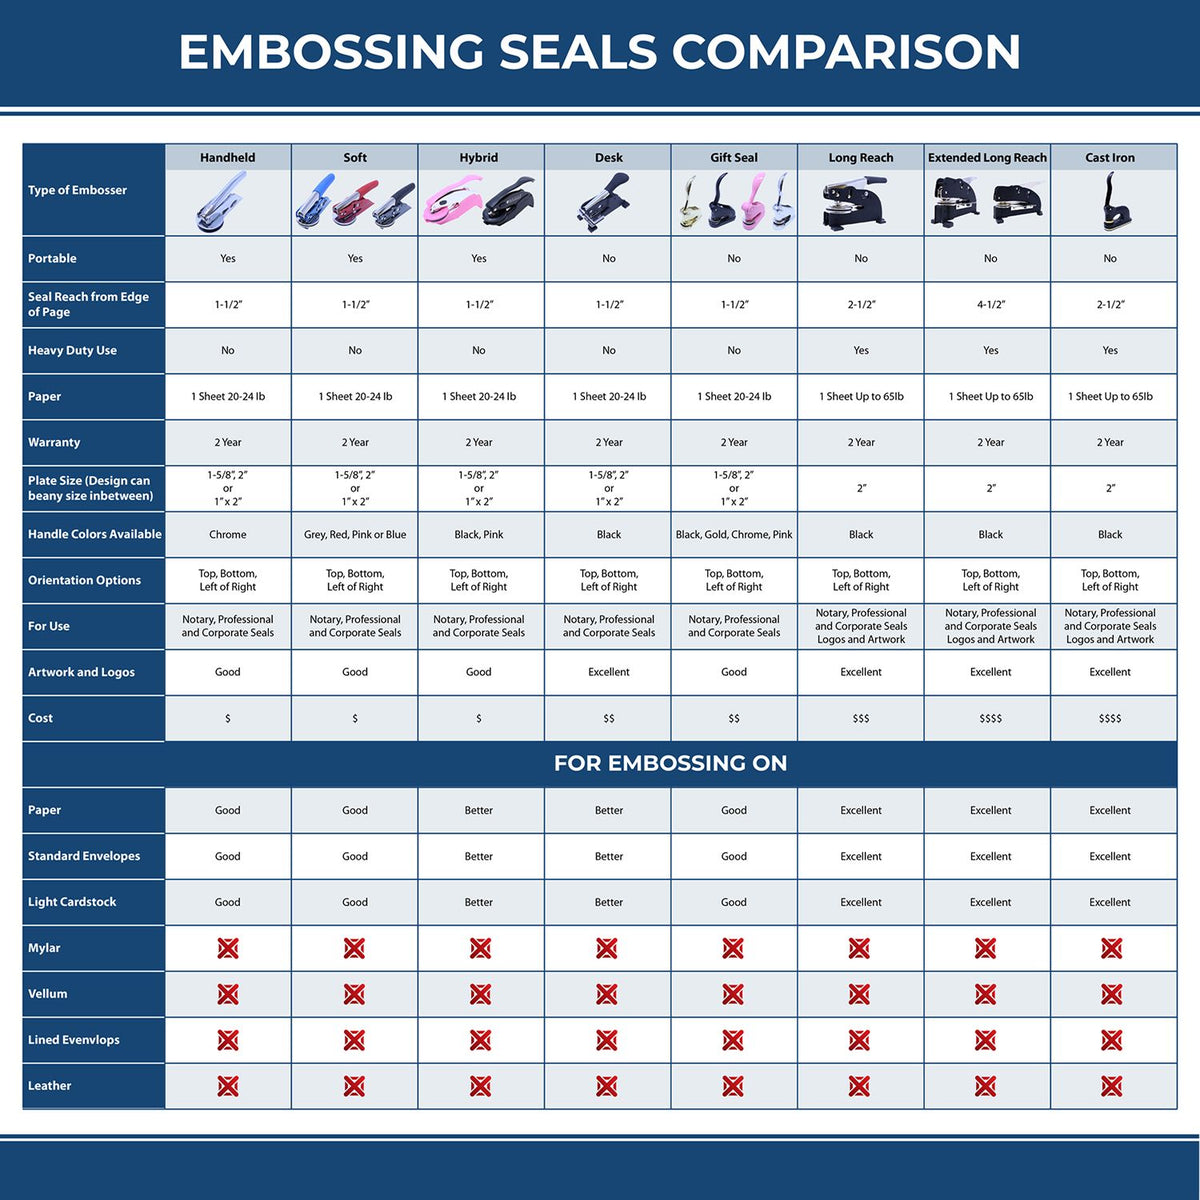 A comparison chart for the different types of mount models available for the Handheld Kentucky Architect Seal Embosser.